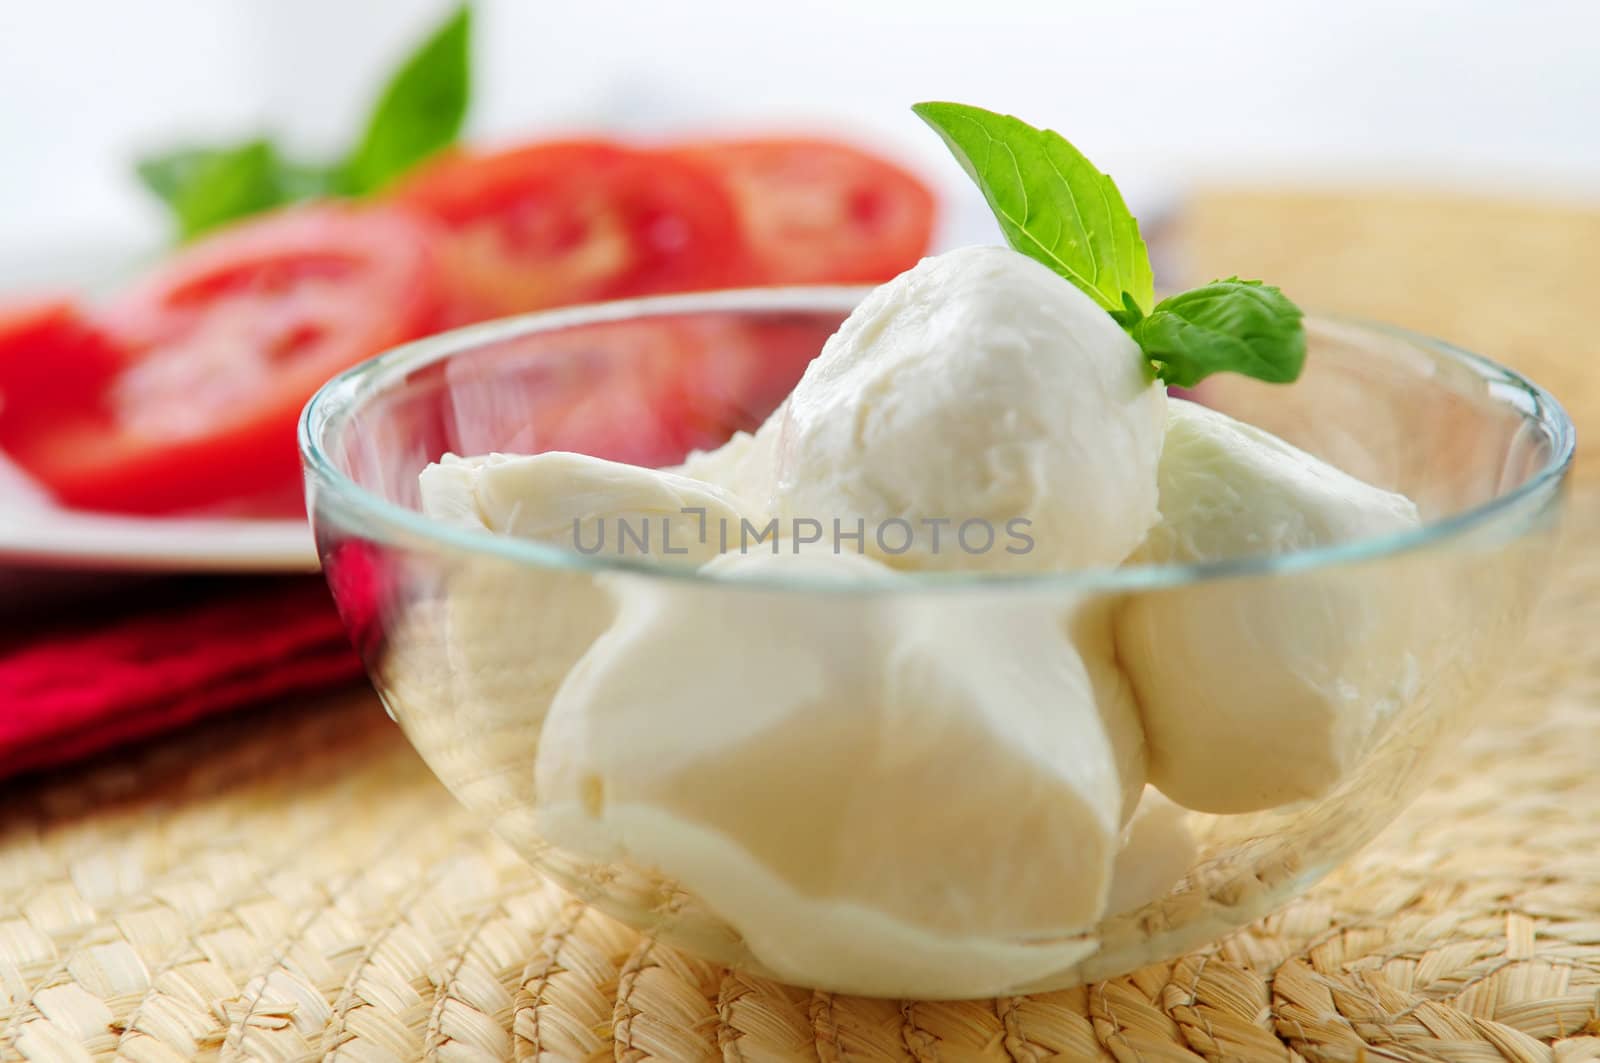 Bocconcini cheese by elenathewise